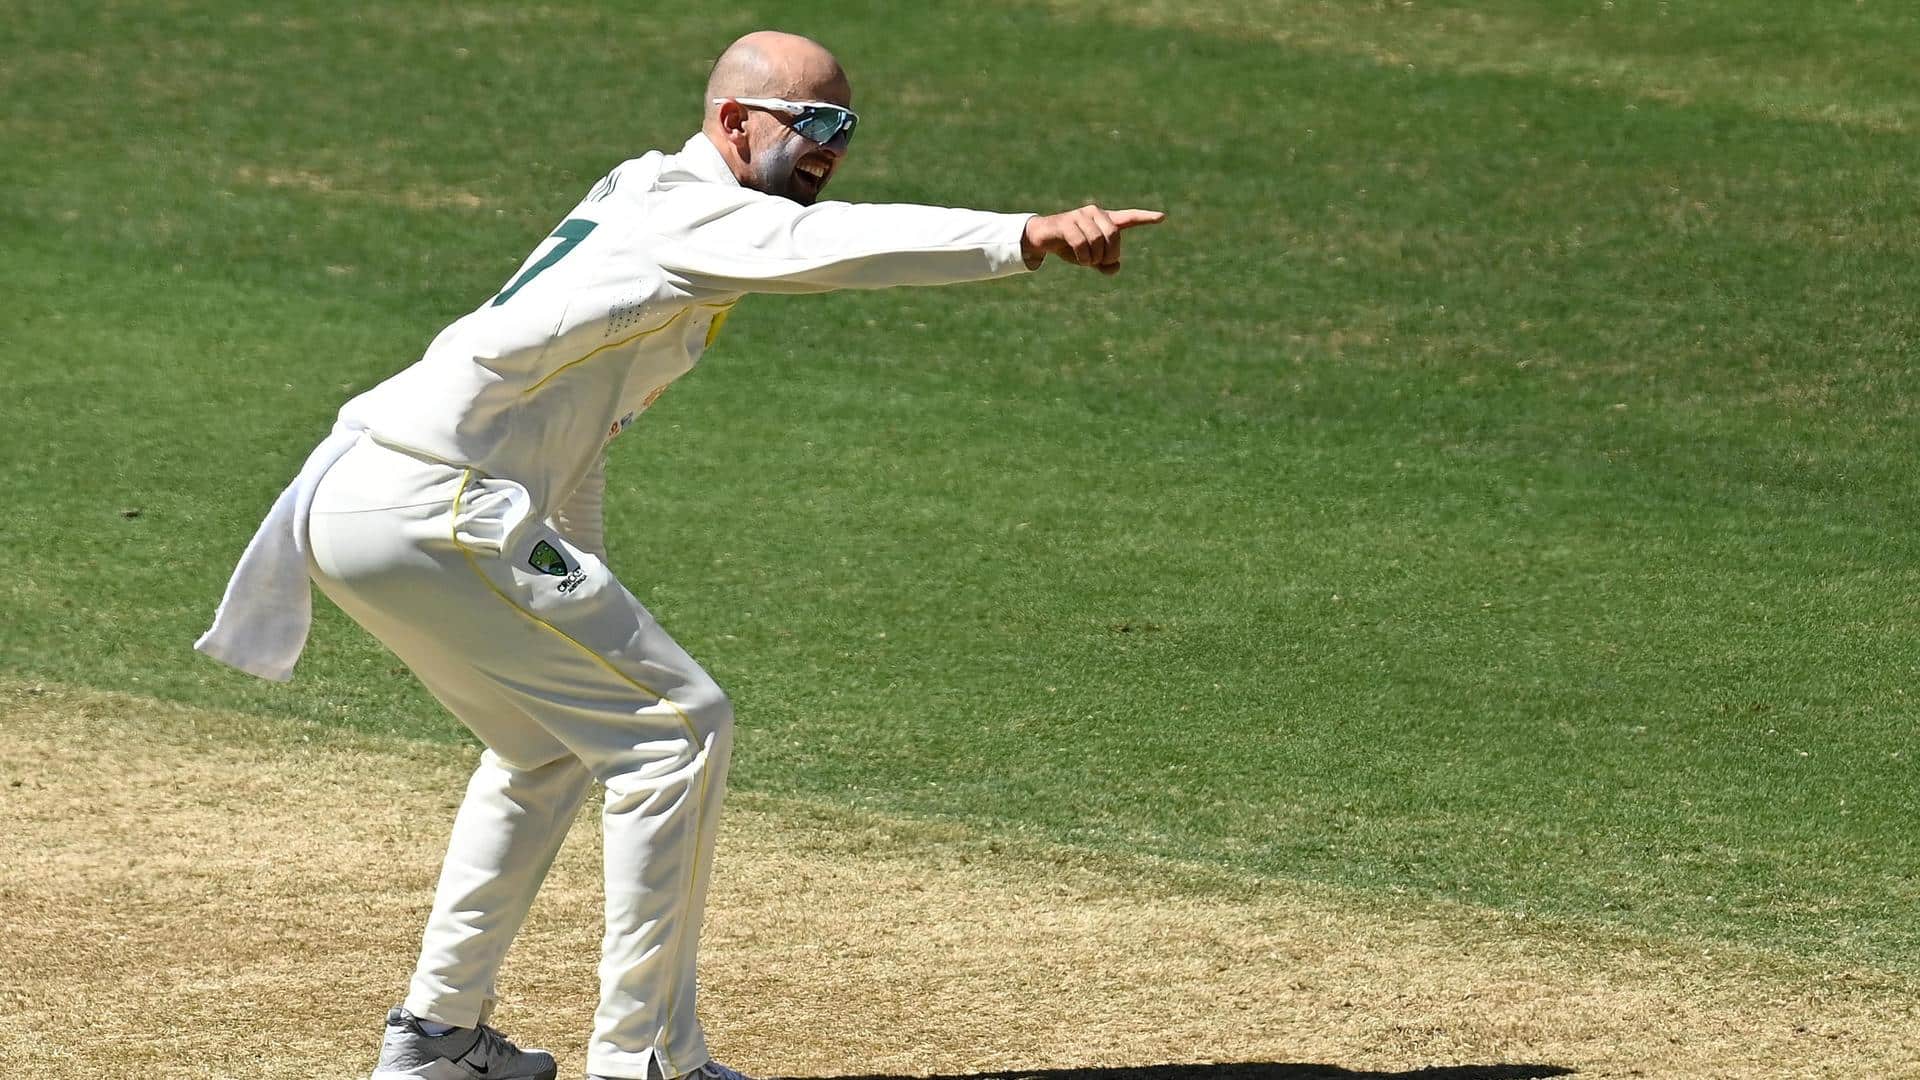 Nathan Lyon completes 50 Test wickets in England: Key stats